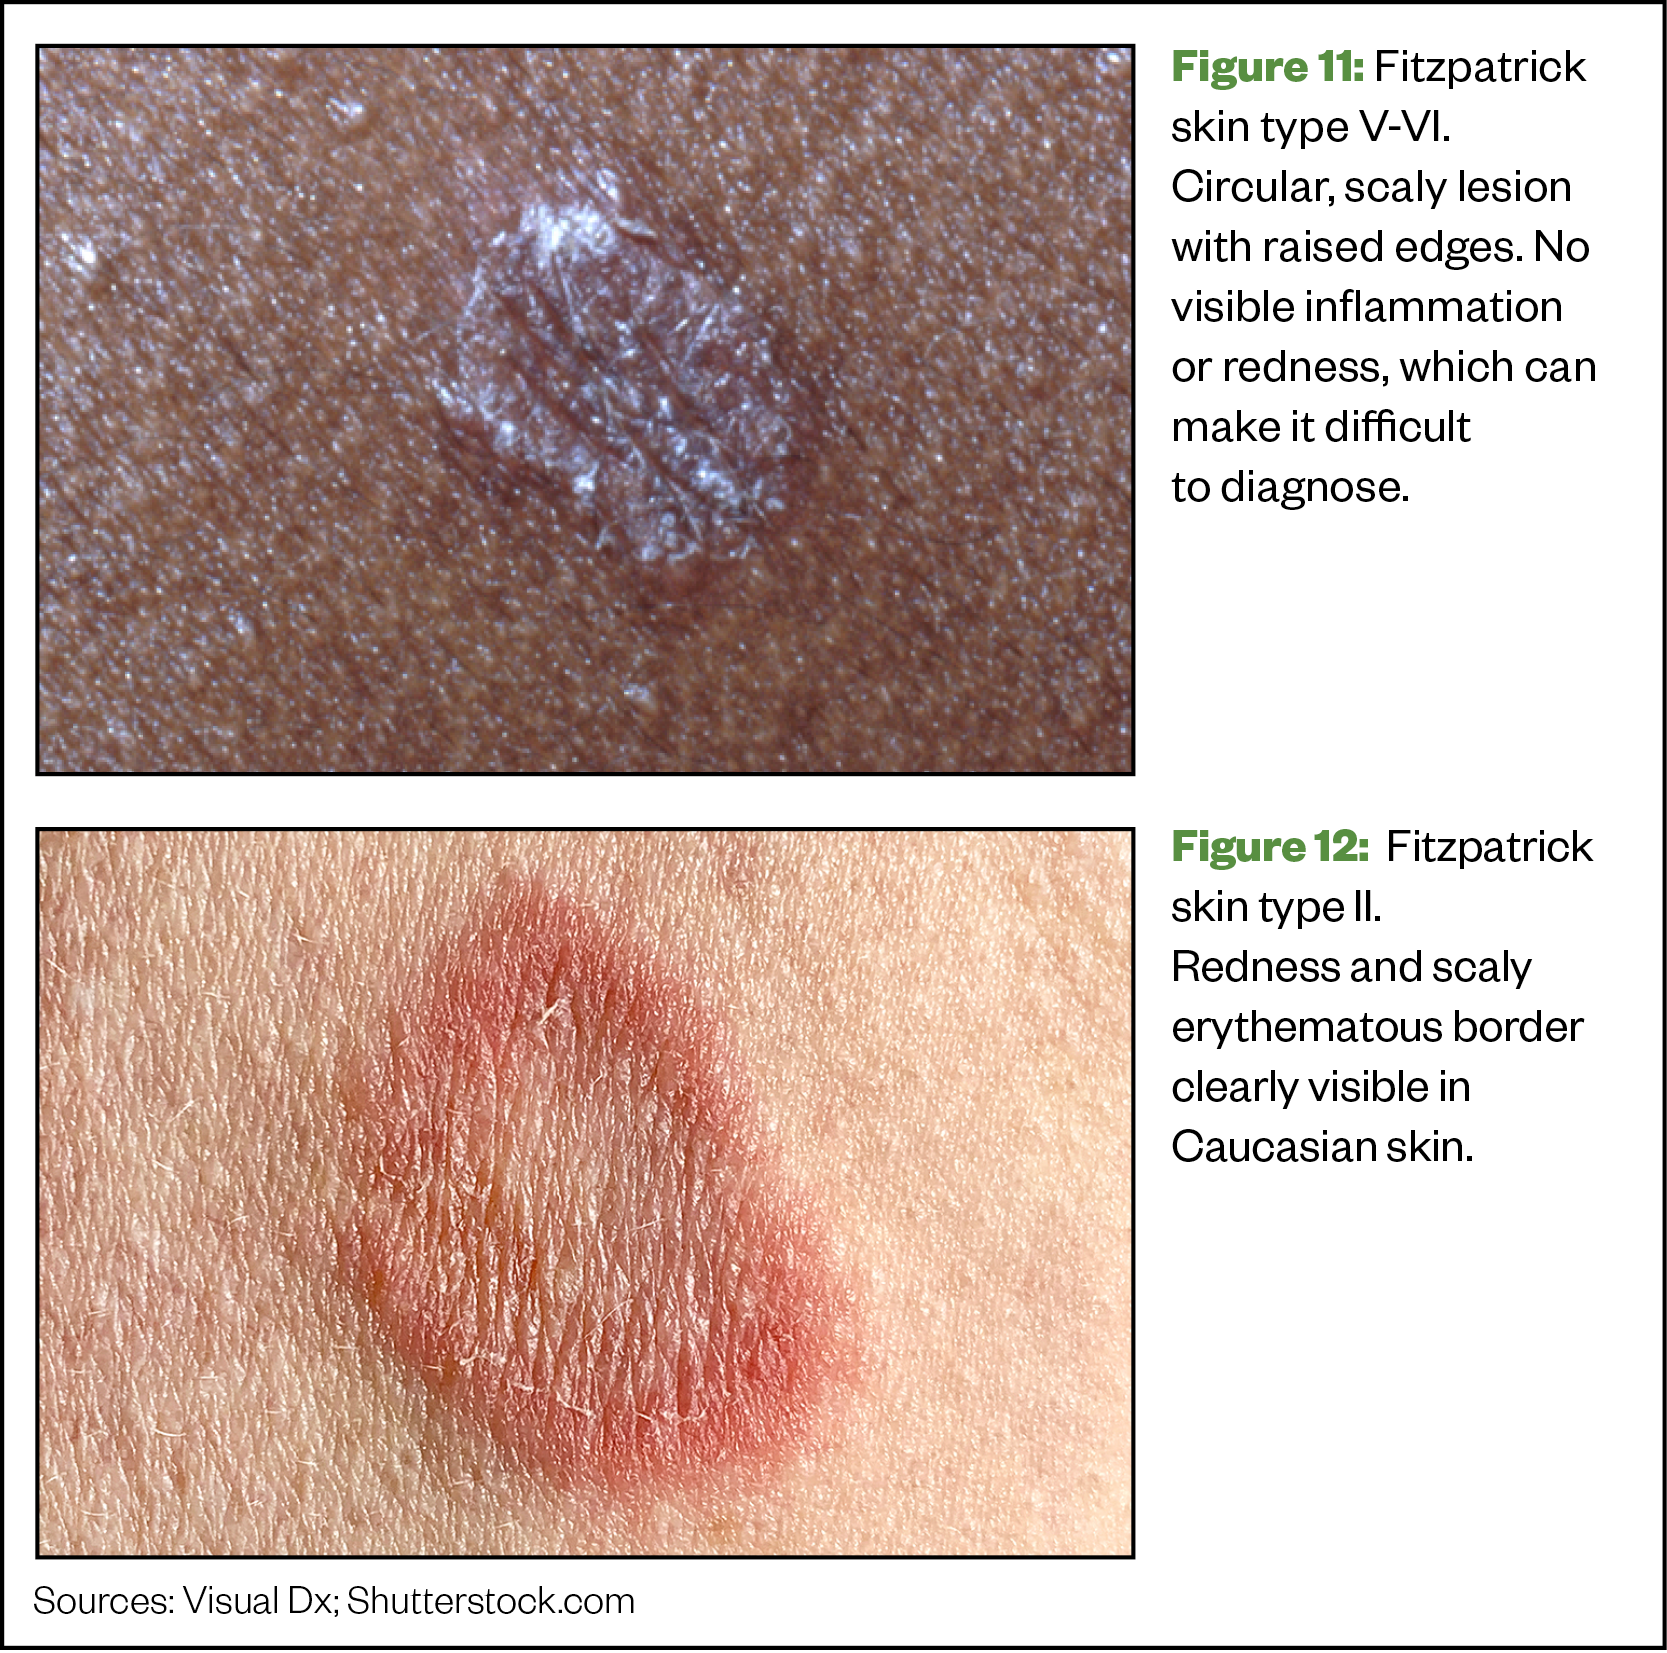 Figure 11: Fitzpatrick skin type V-VI. Circular, scaly lesion with raised edges. Figure 12:  Fitzpatrick skin type II. Redness and scaly erythematous border 